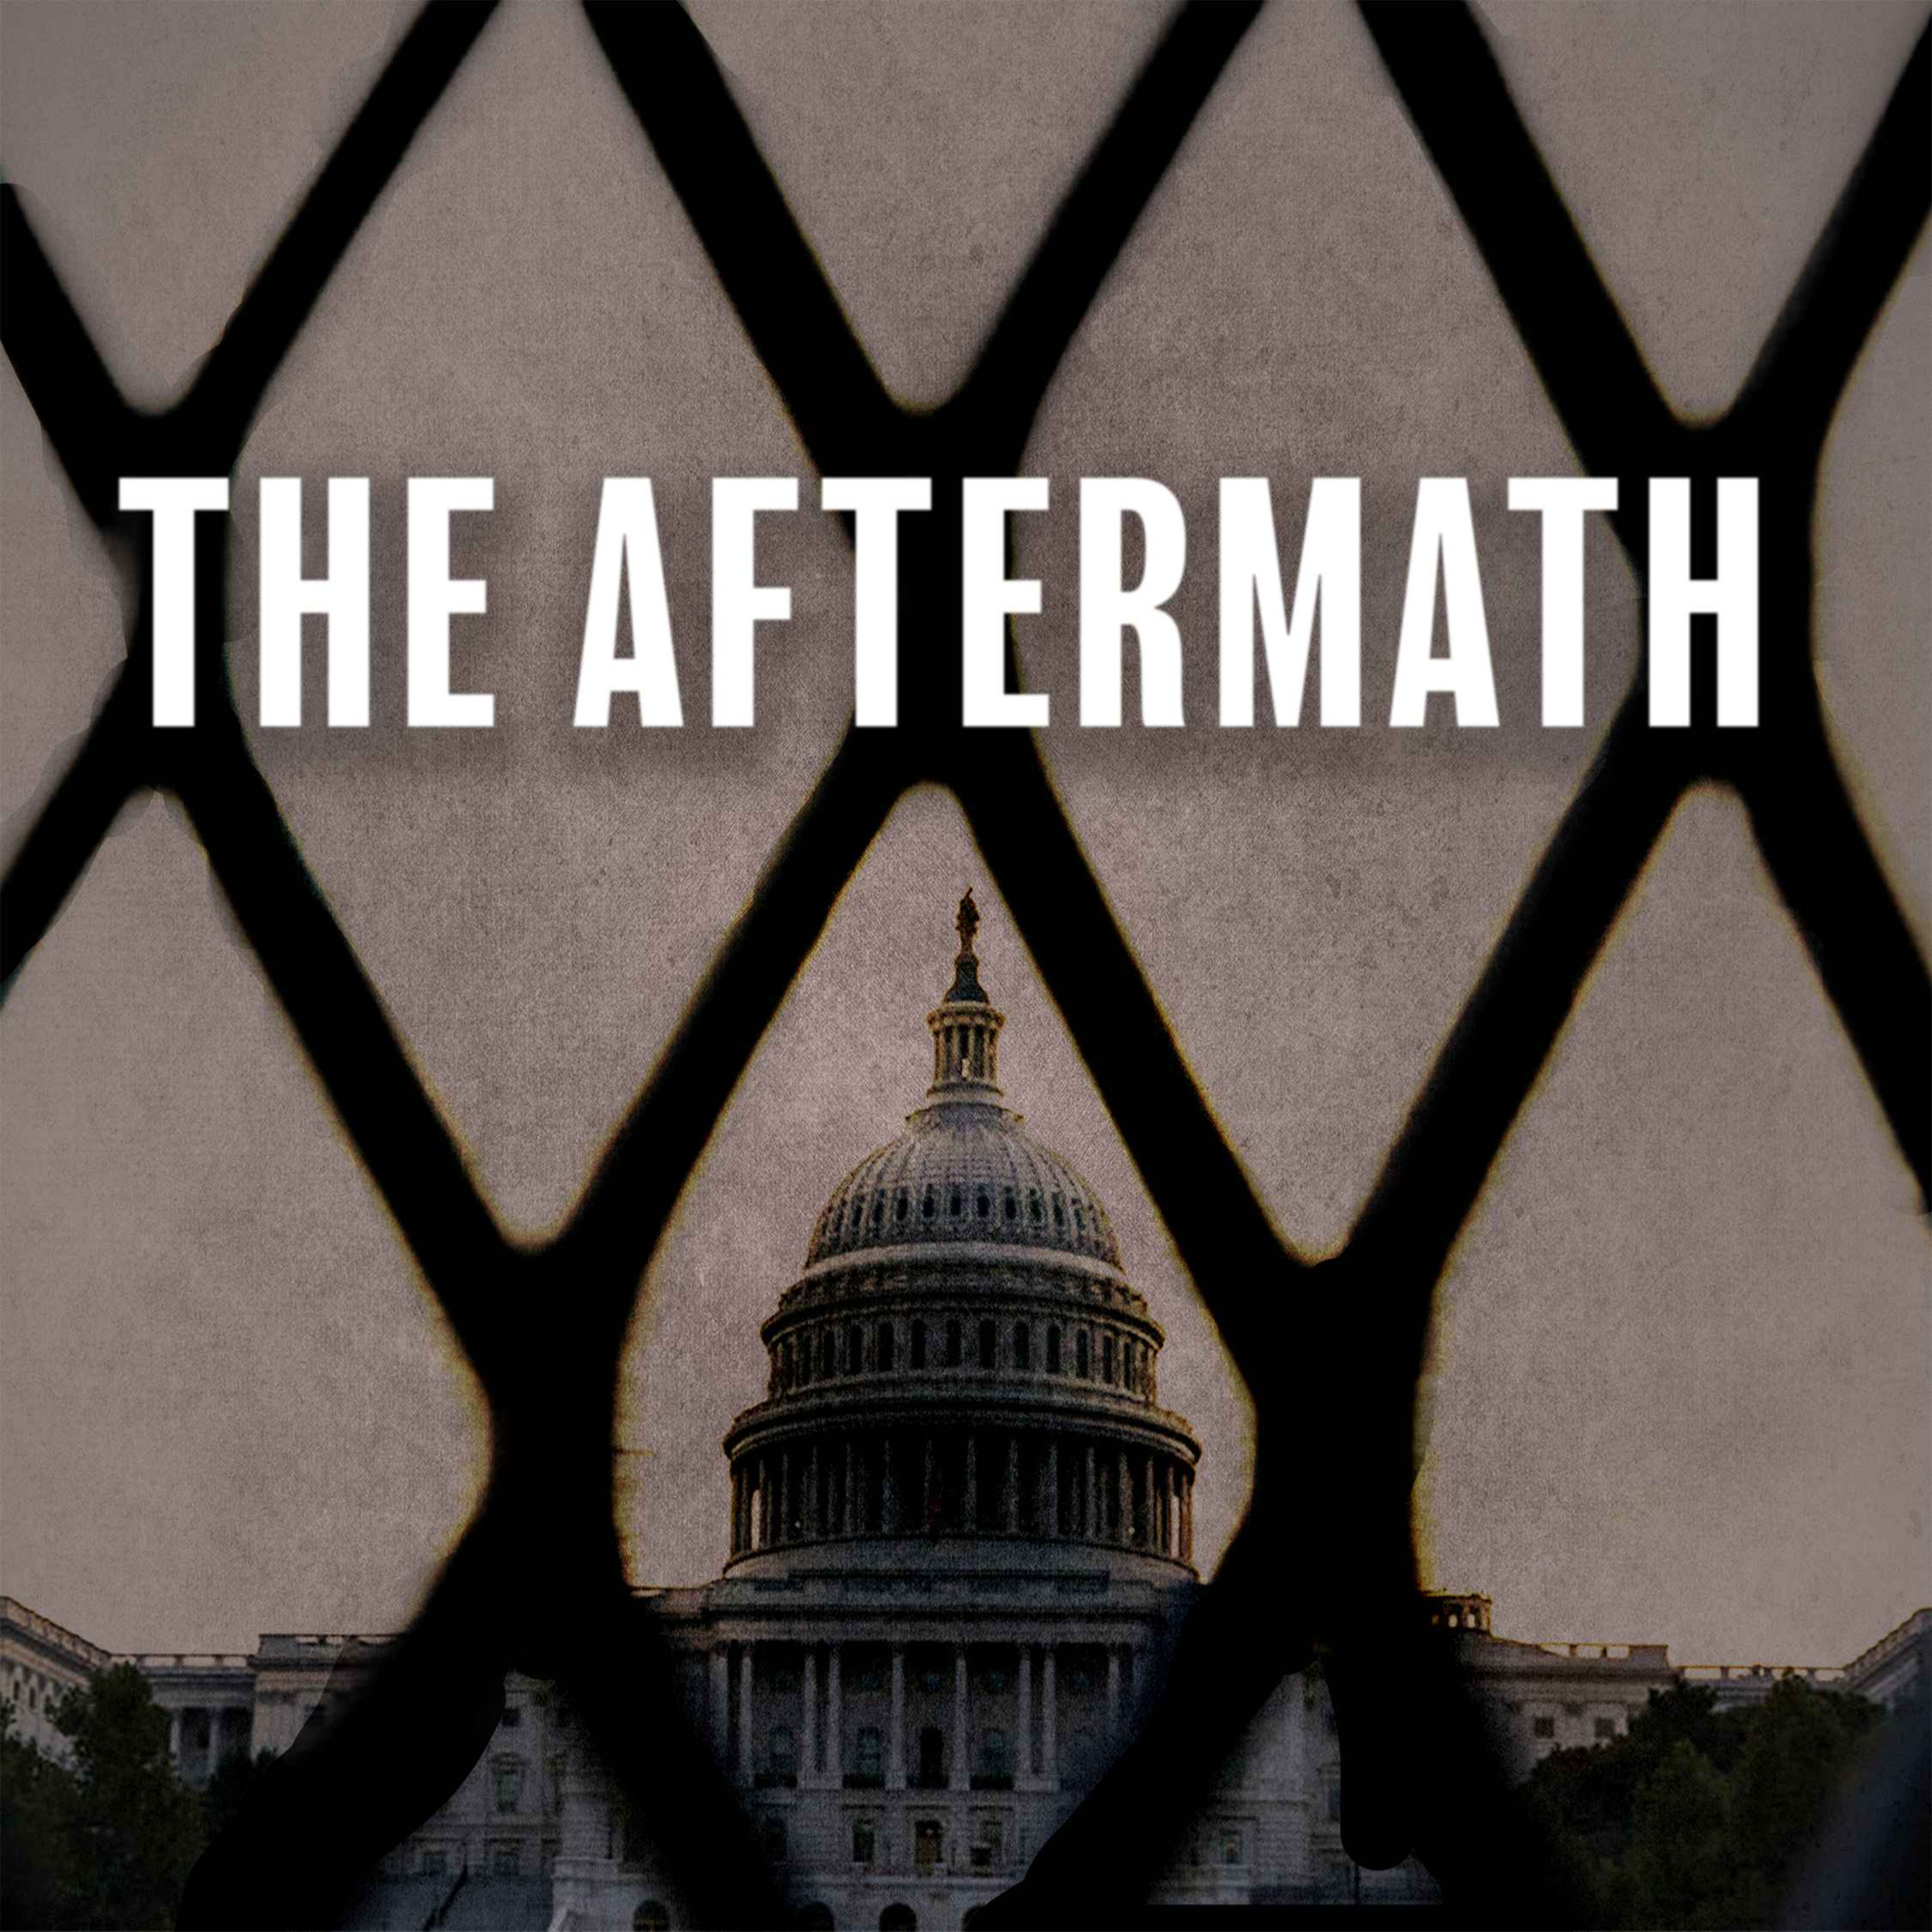 Trailer: The Aftermath